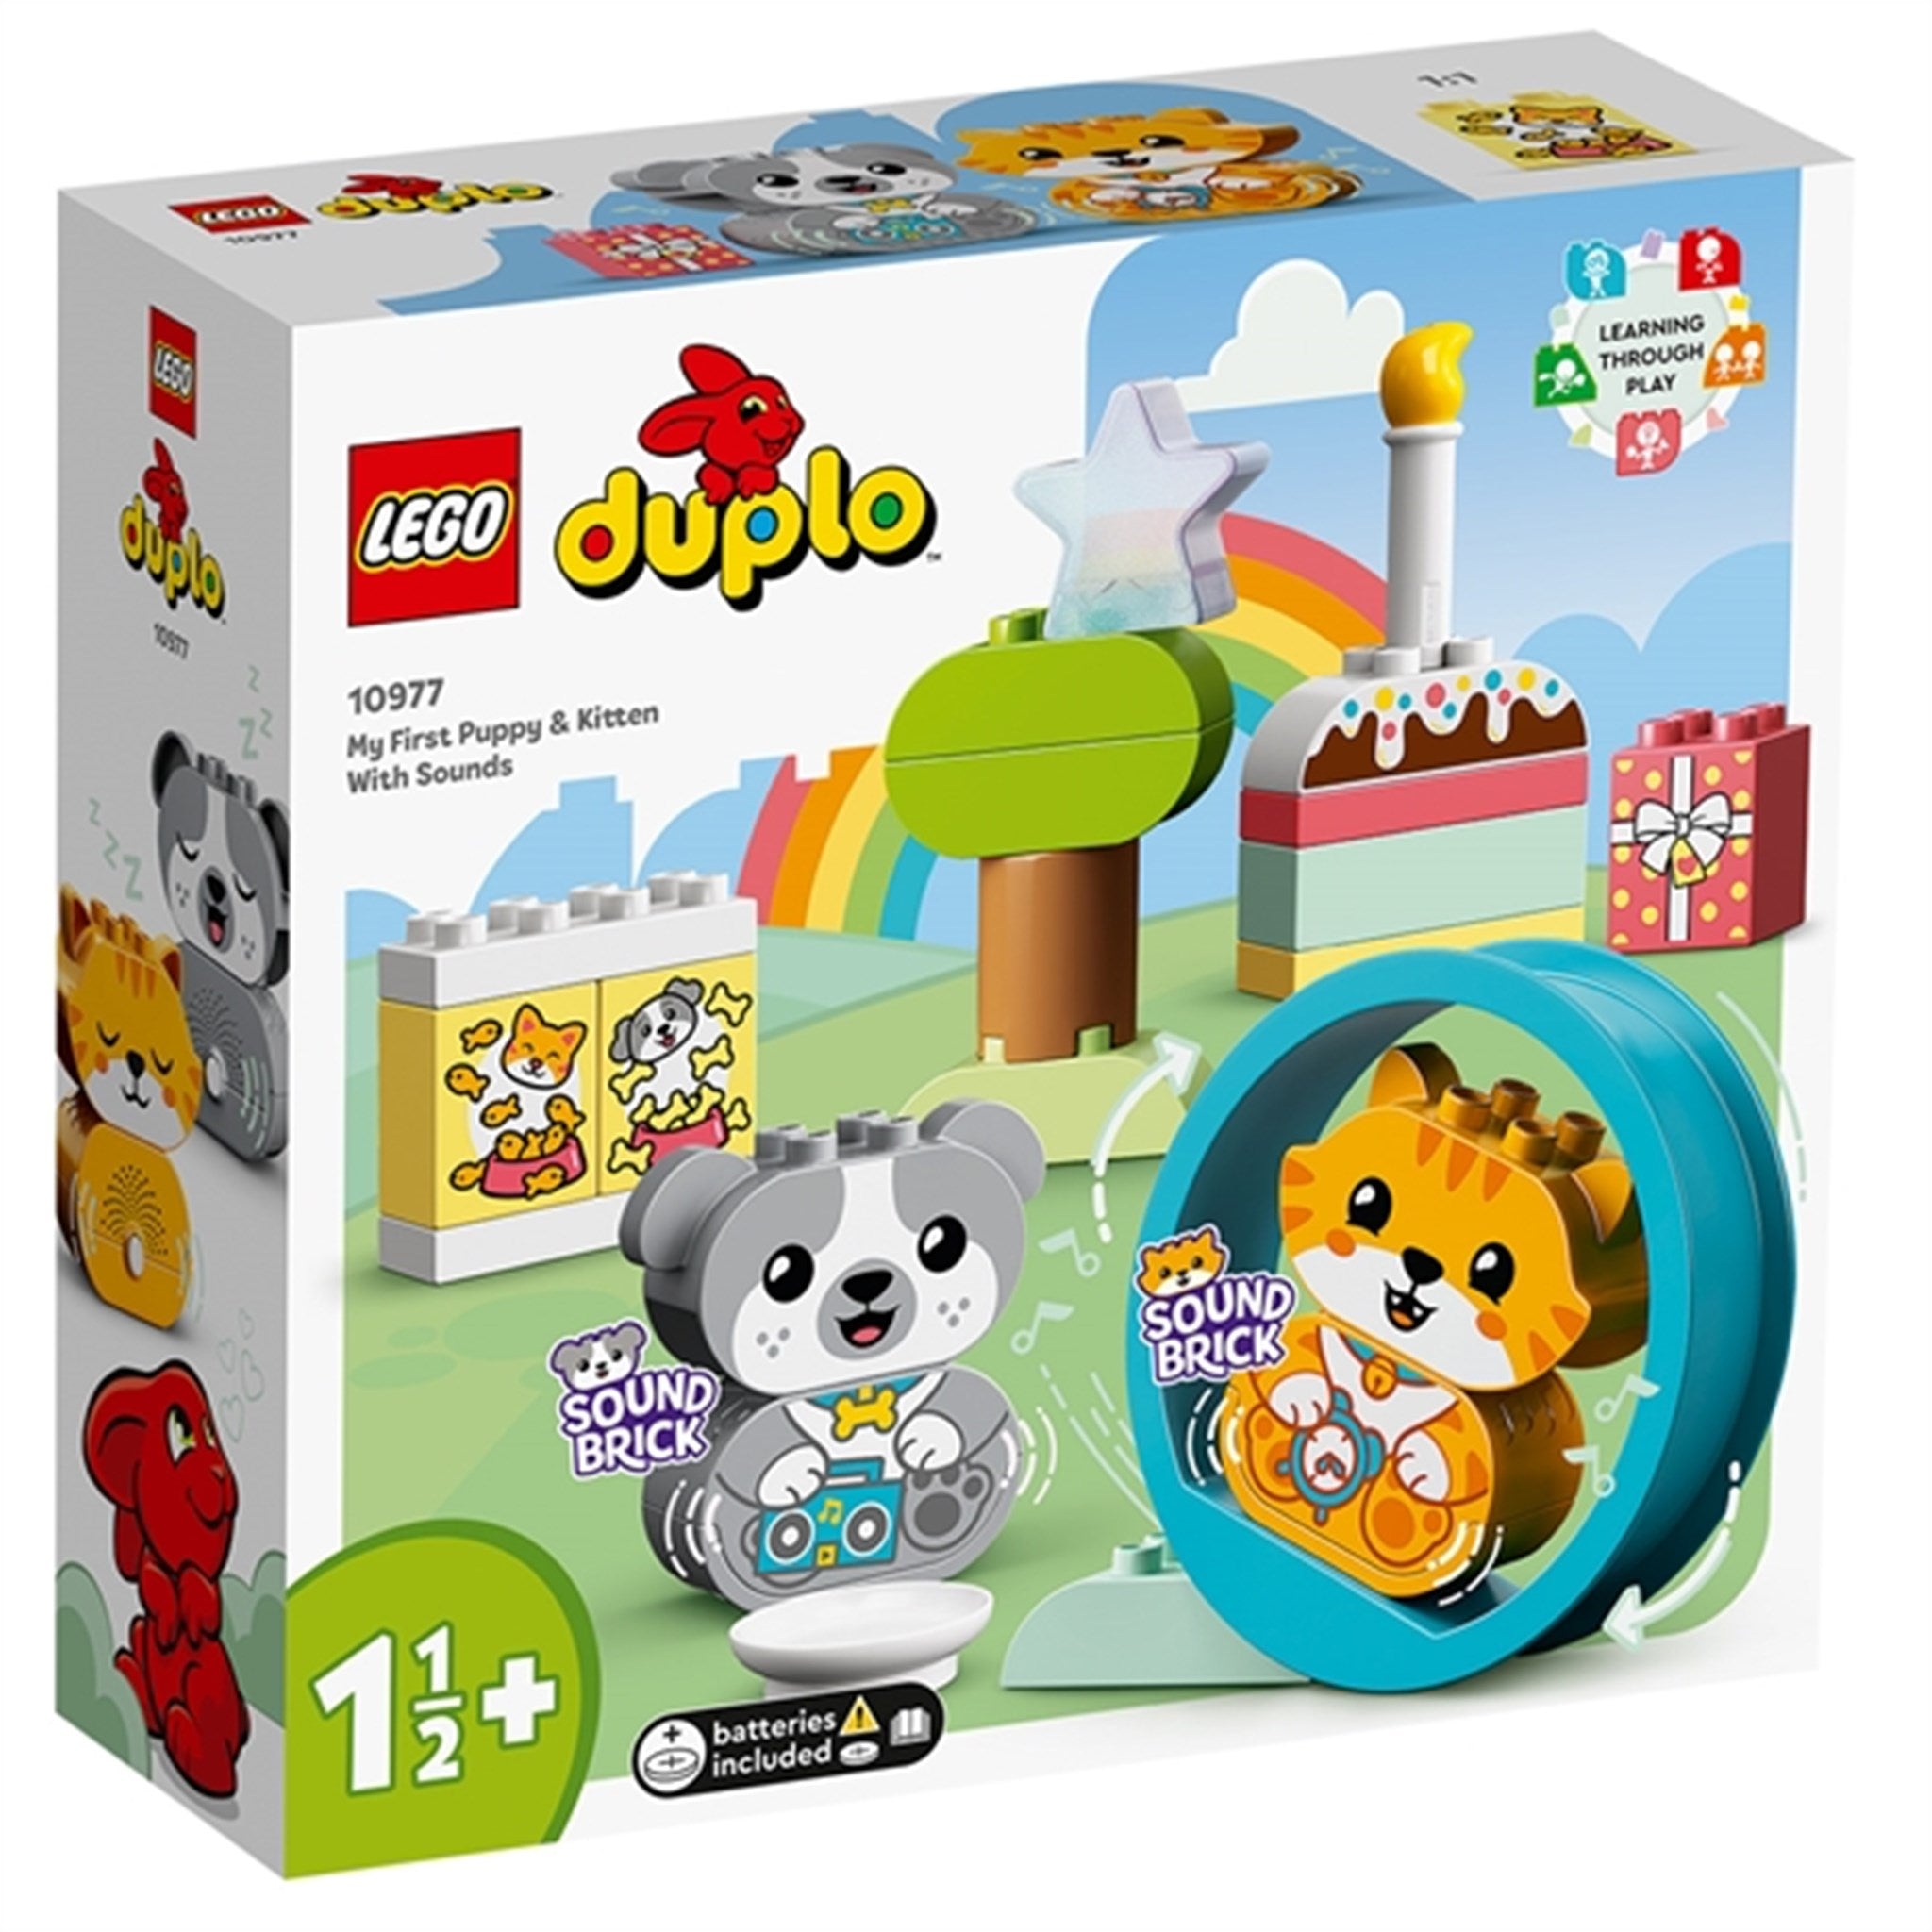 LEGO® DUPLO® My First Puppy and Kitten with Sounds